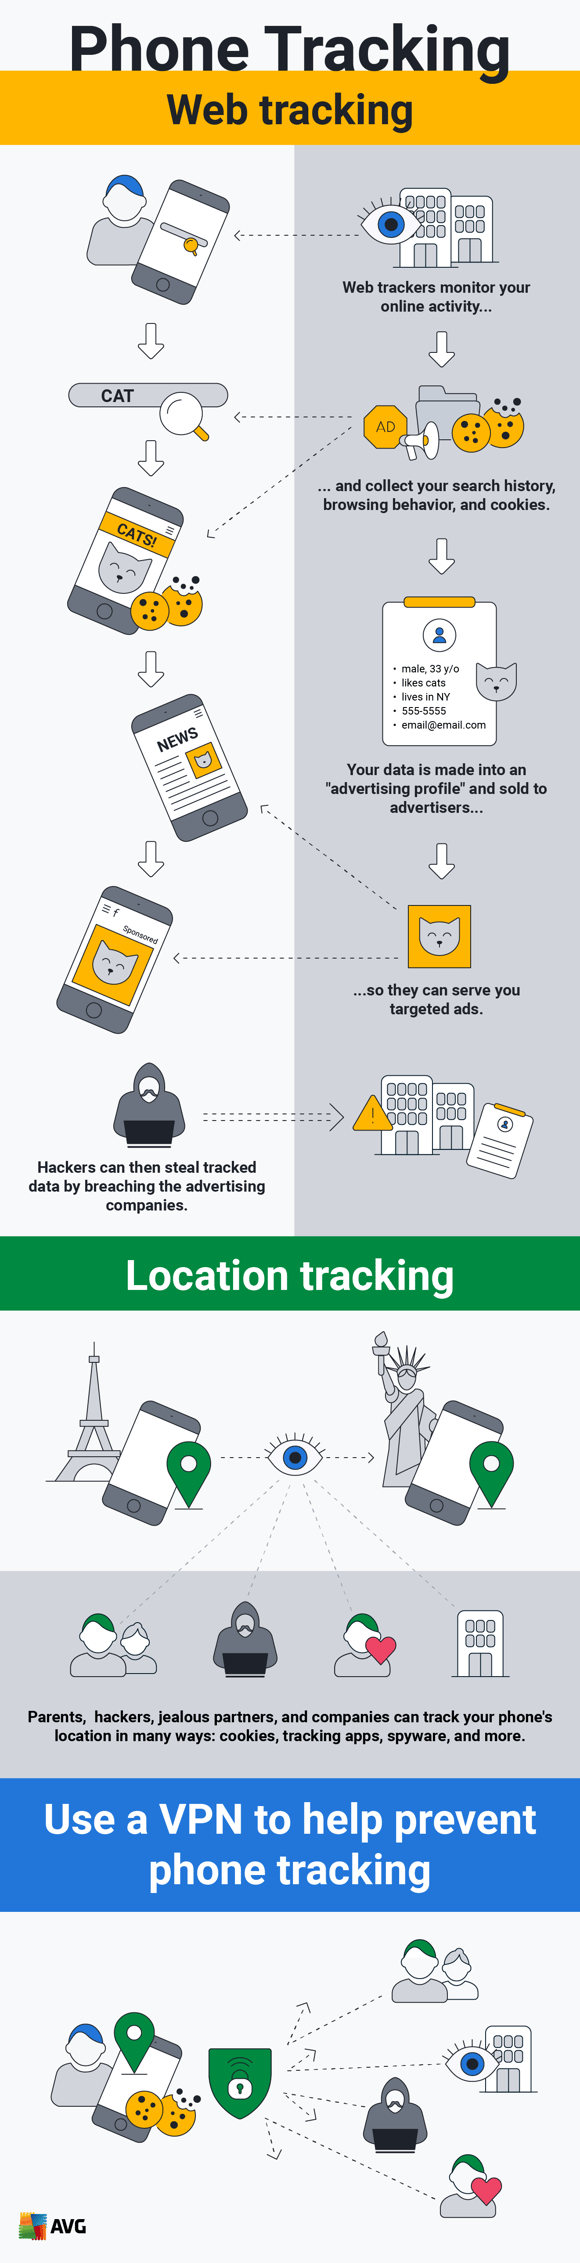 VPNs can help prevent phone tracking by parents, hackers, jealous partners, and companies collecting online activity.